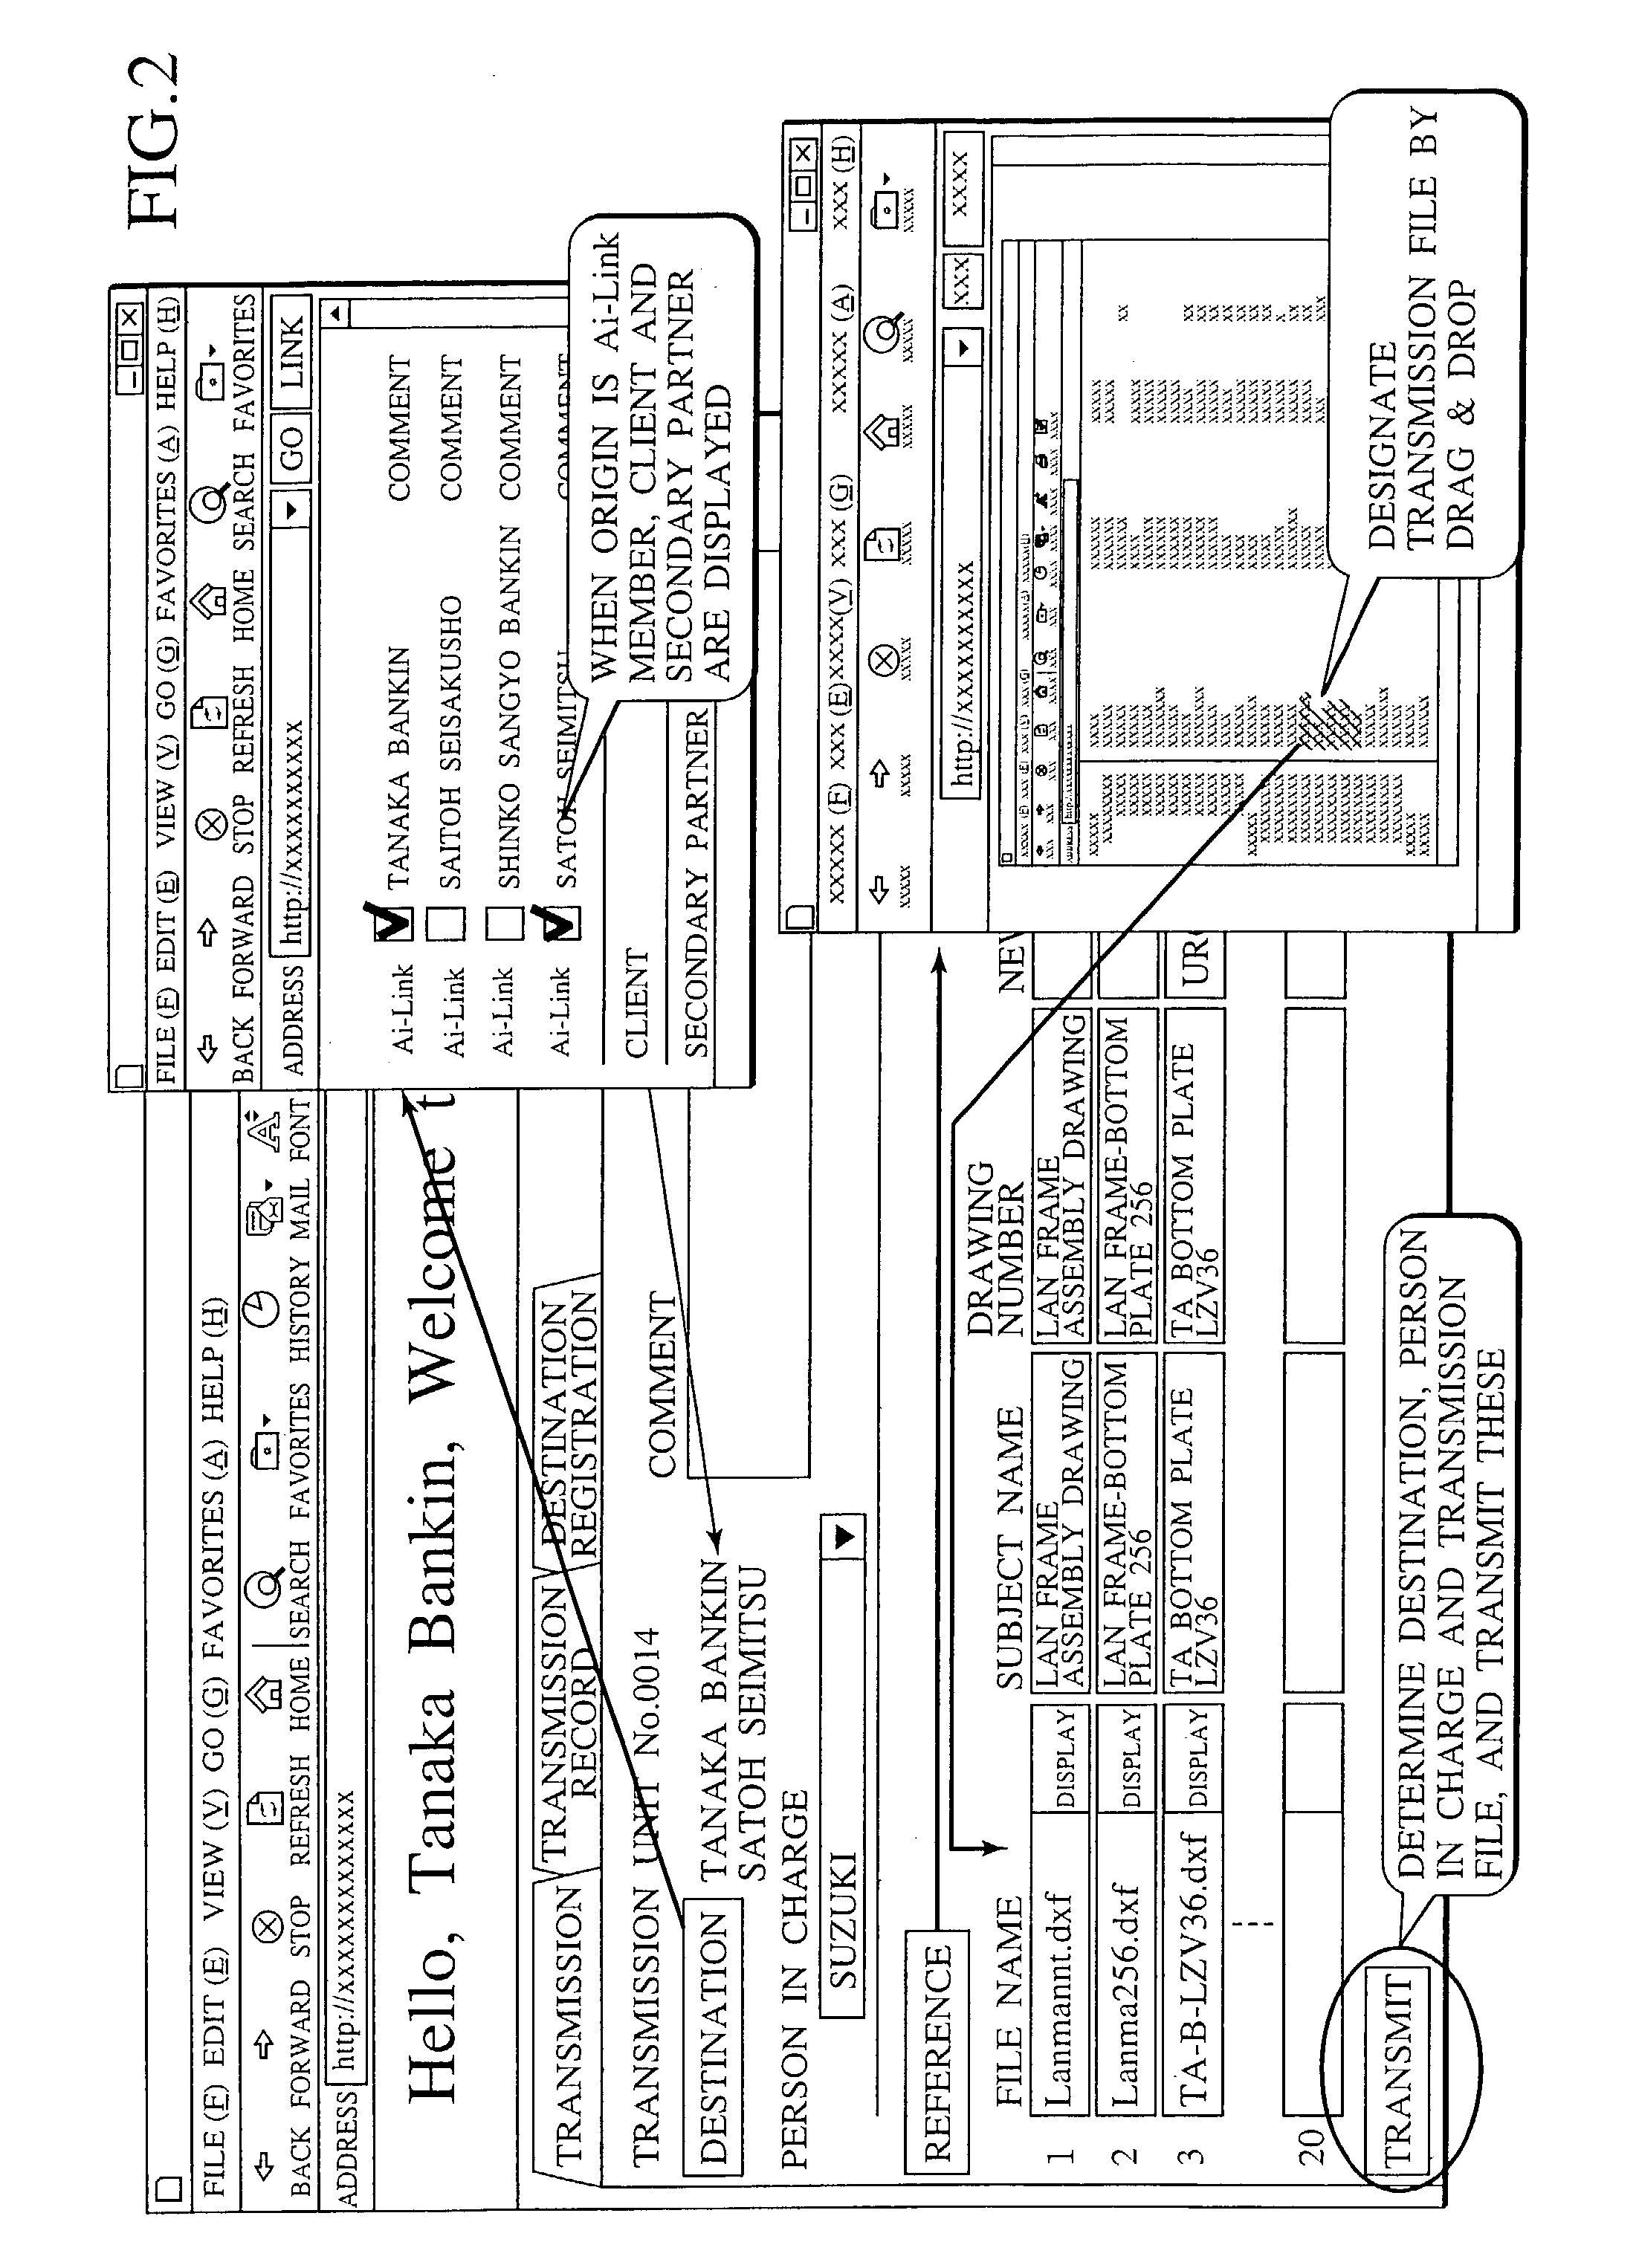 Apparatus for processing electronic drawing data